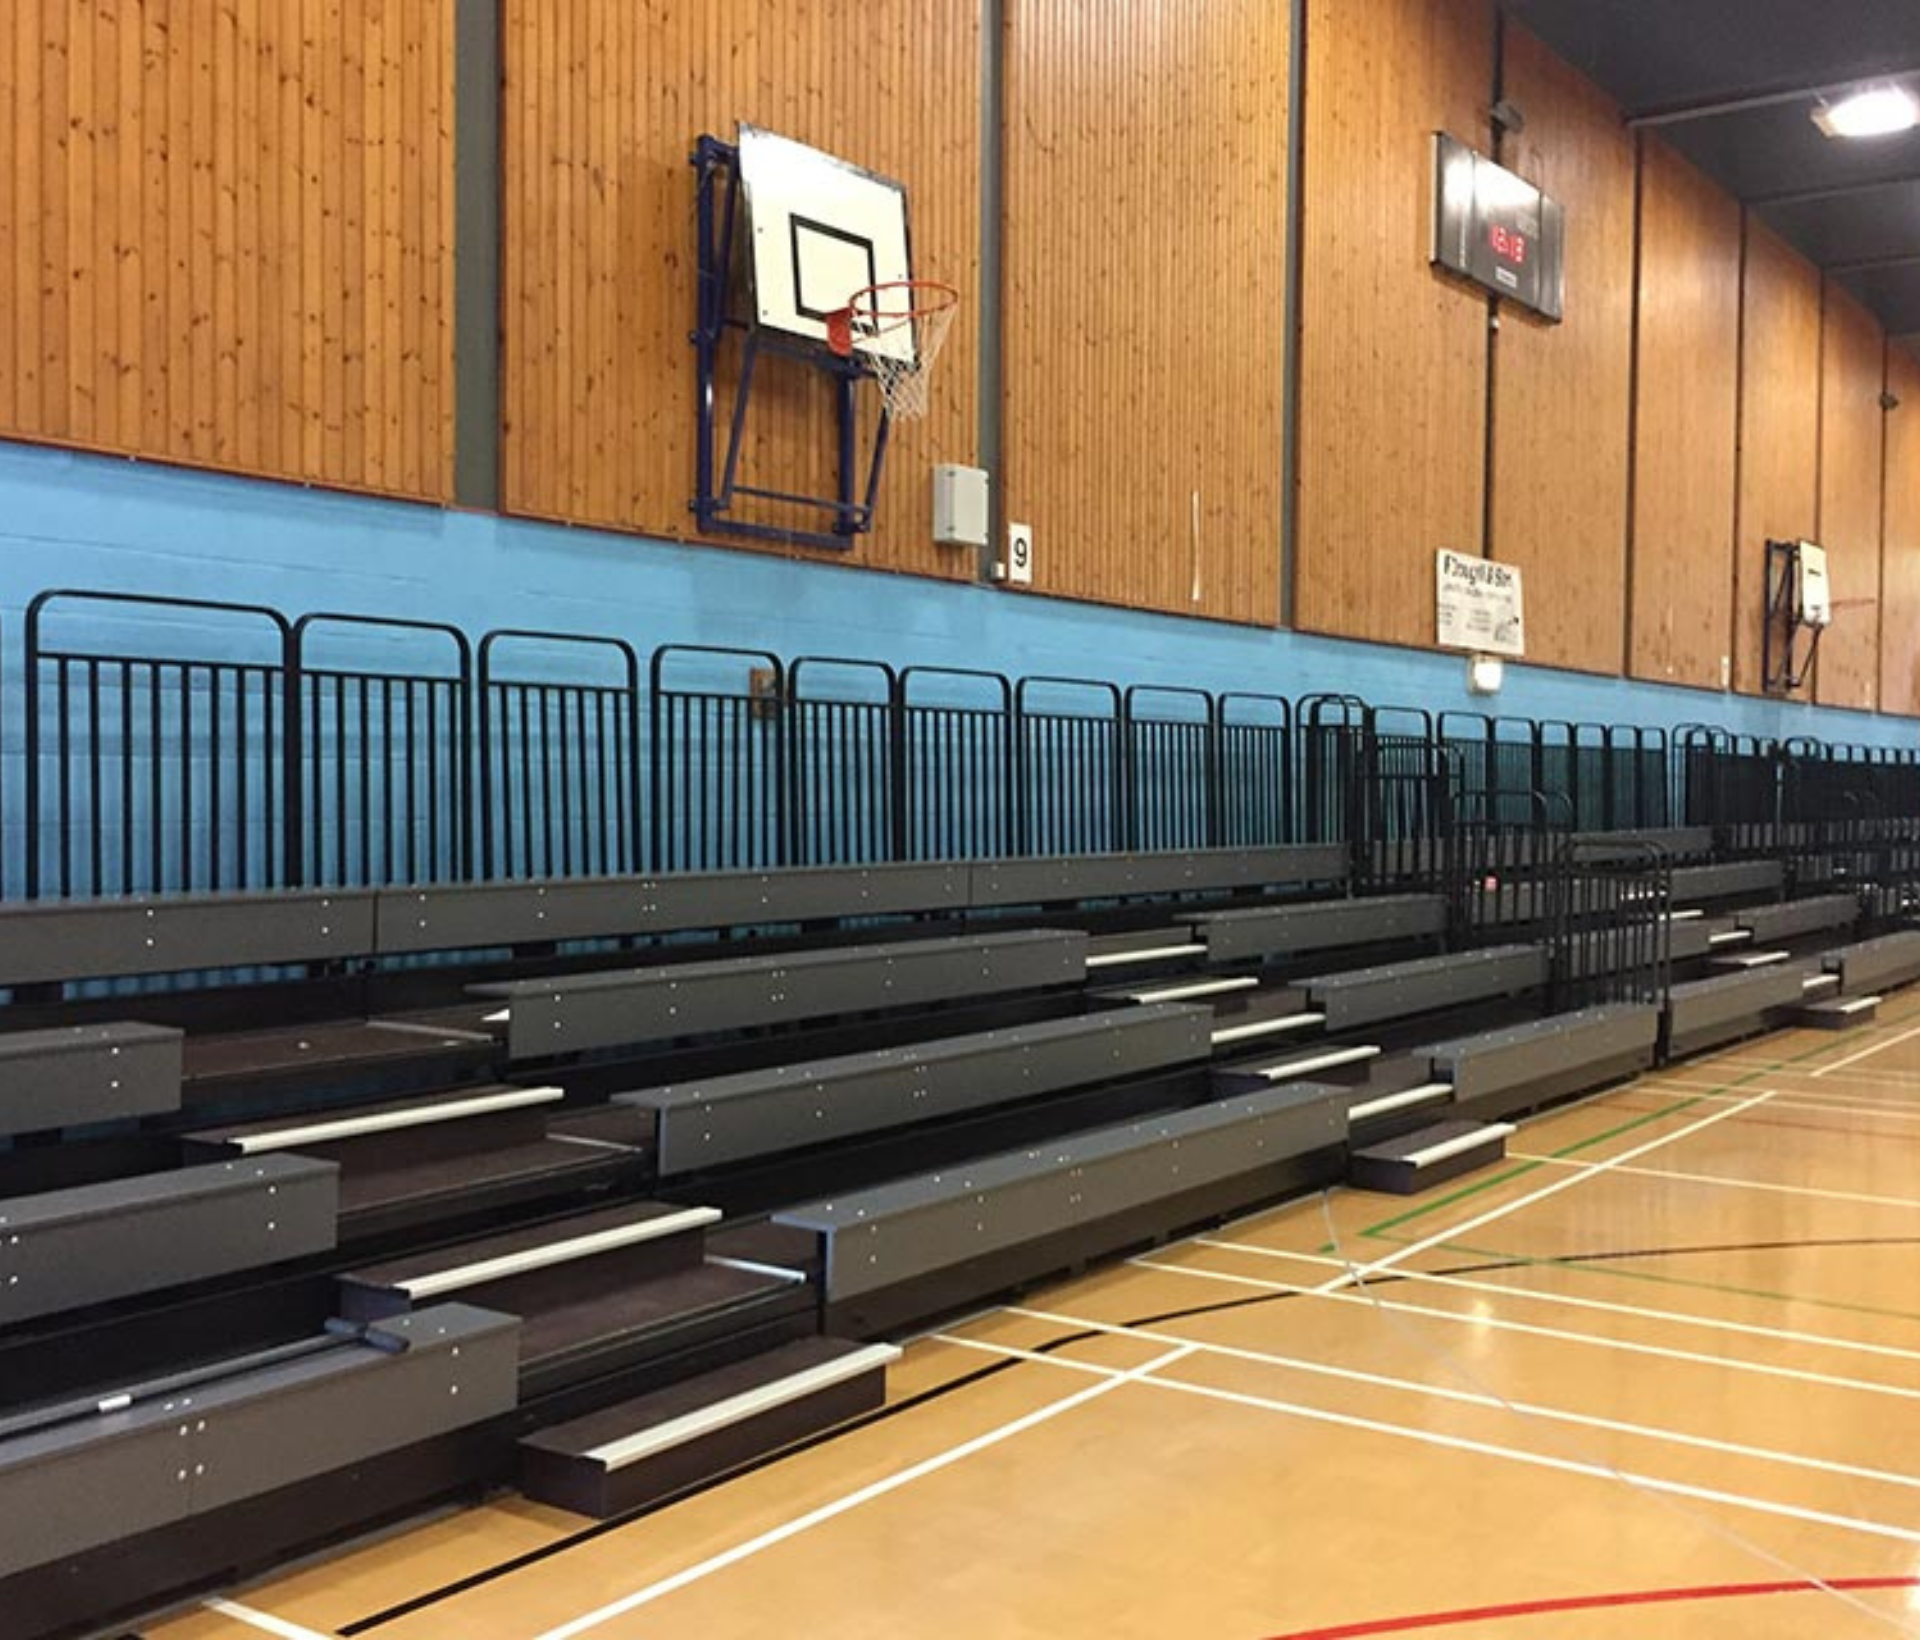 A gym with rows of bleachers and a basketball hoop.